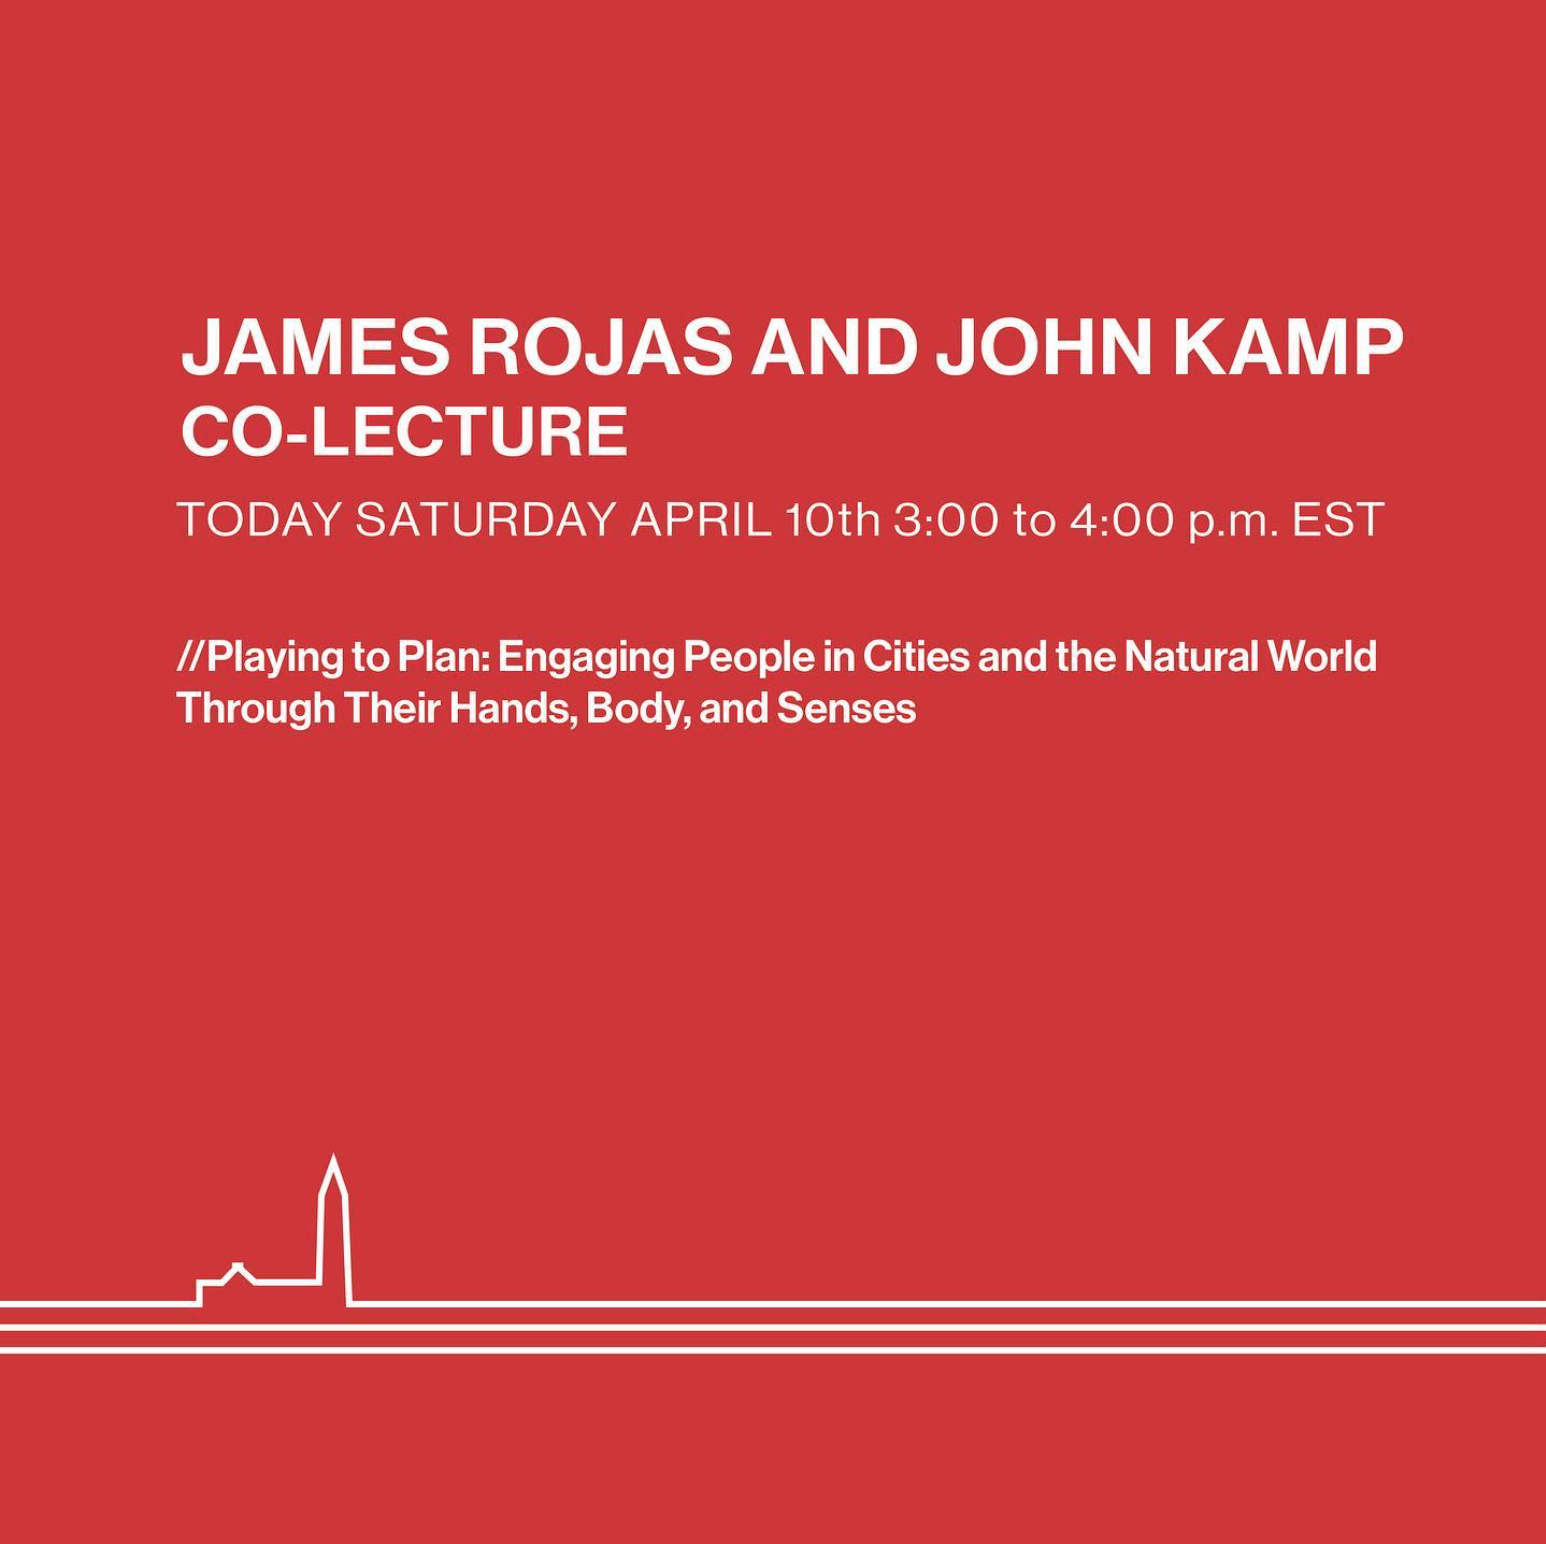 Flyer for talk James Rojas and John Kamp are giving at the LA Bash conference at Cornell University on engaging people through their hands and senses in landscape and urban design.